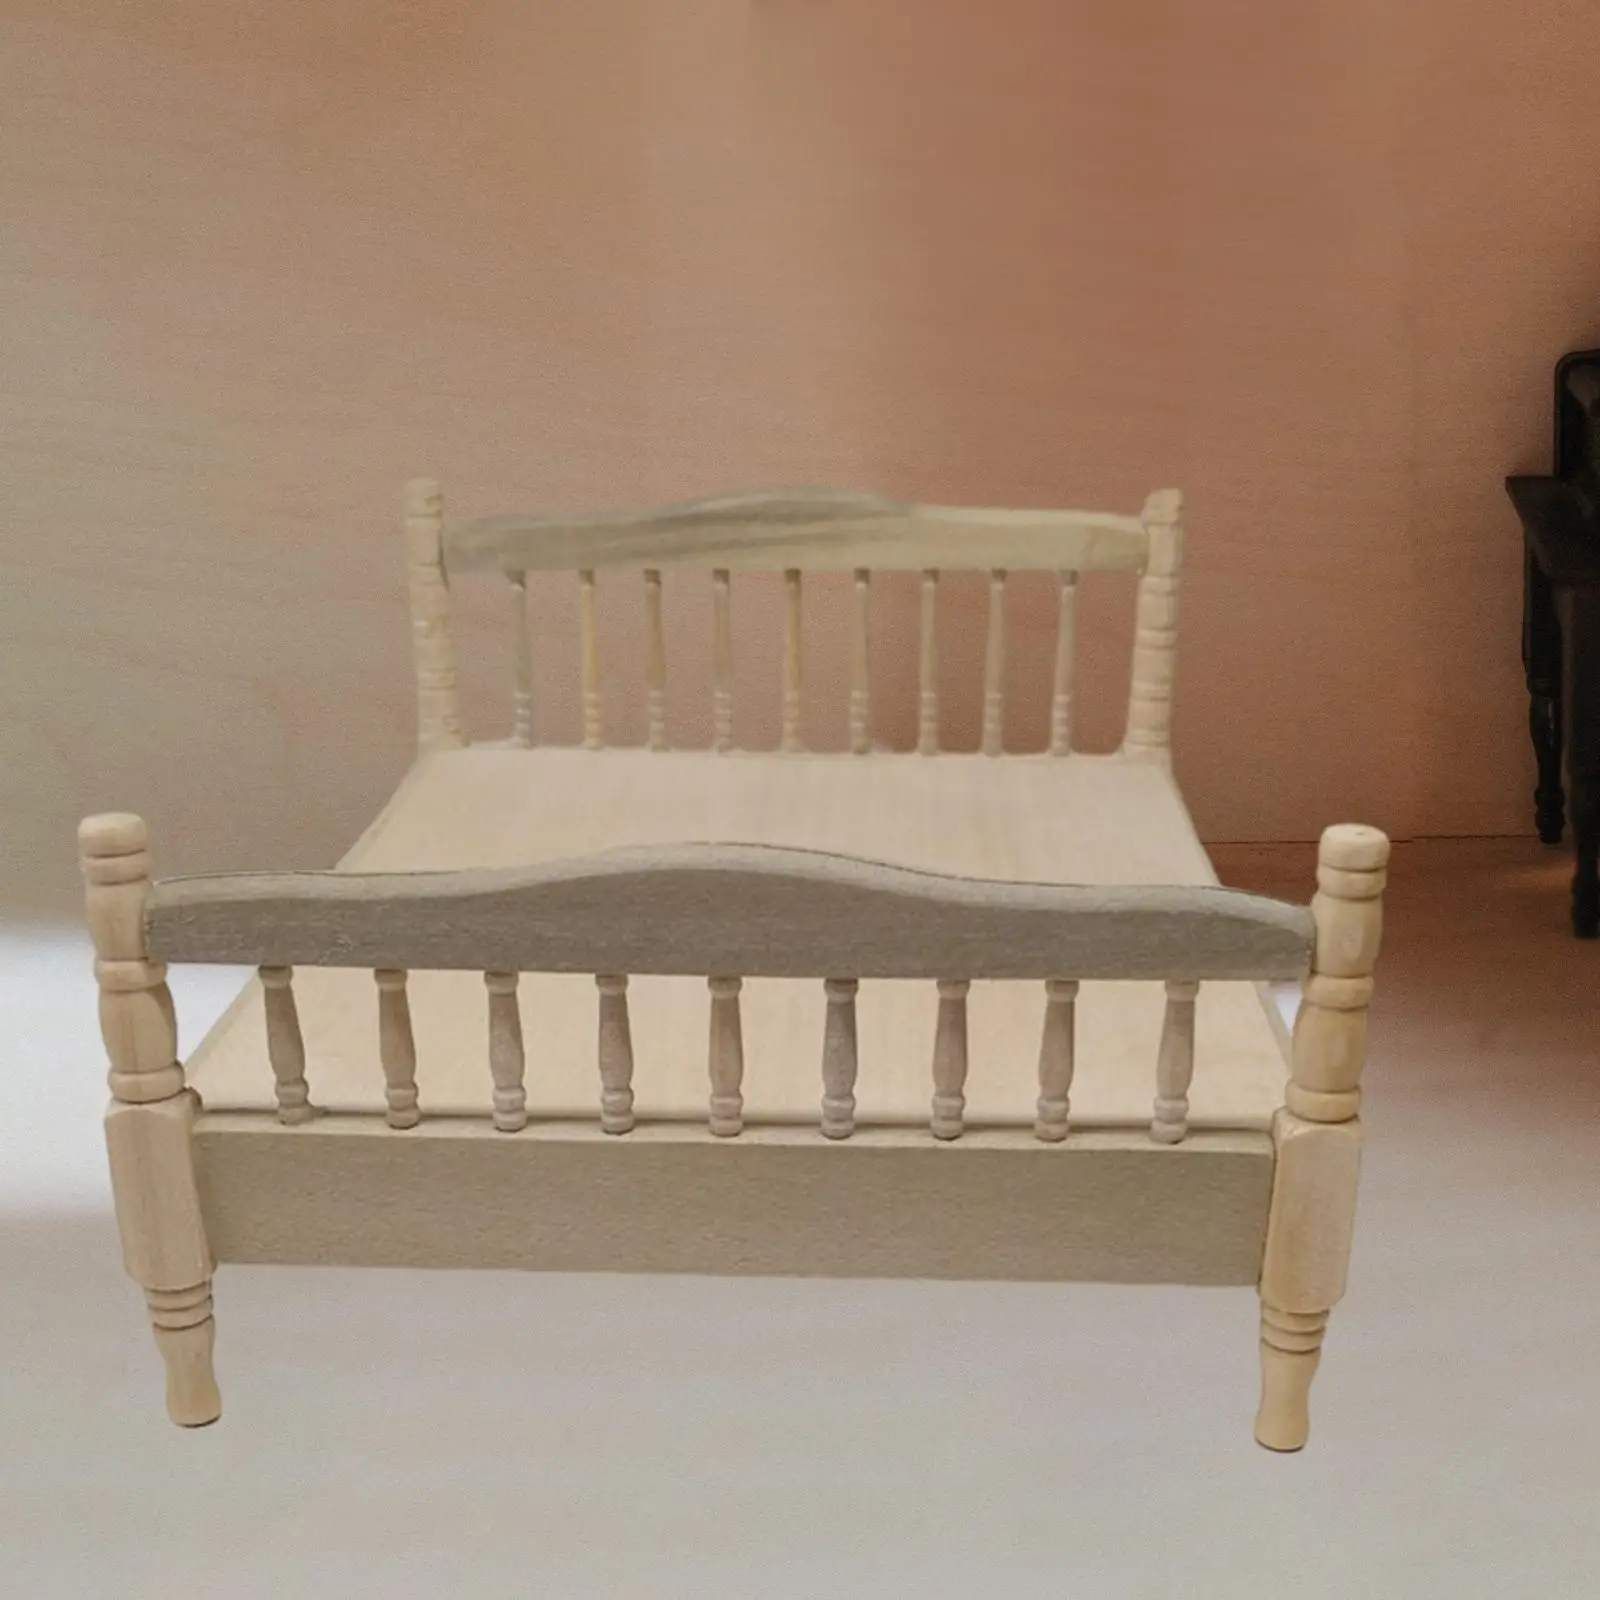 1:12 European Double Bed Craft Wooden Mini Bed for Architectural Railway Station Fairy Garden Micro Landscape Accessories